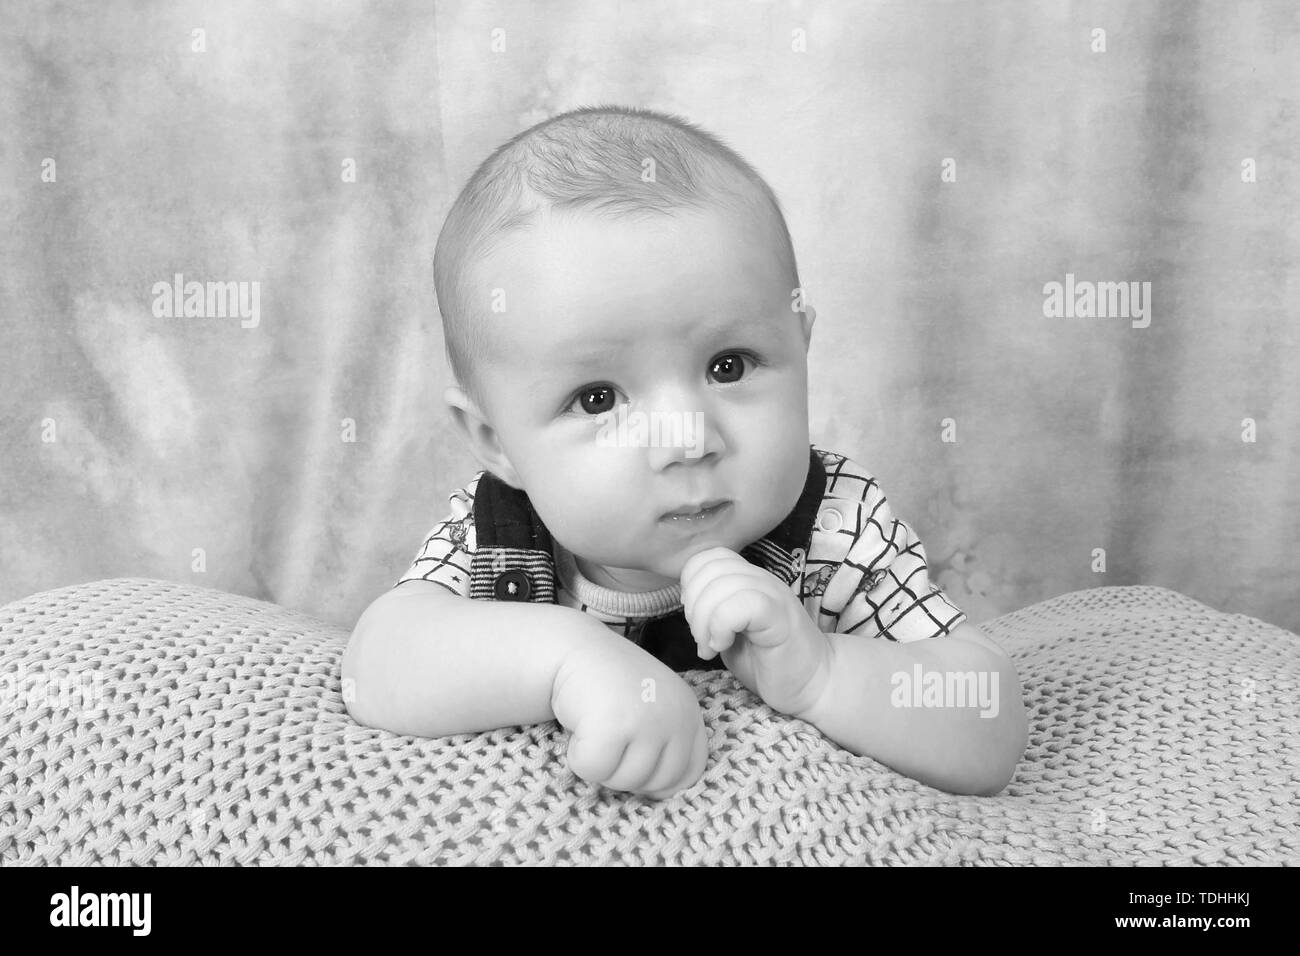 3 month old baby boy relaxing Stock Photo